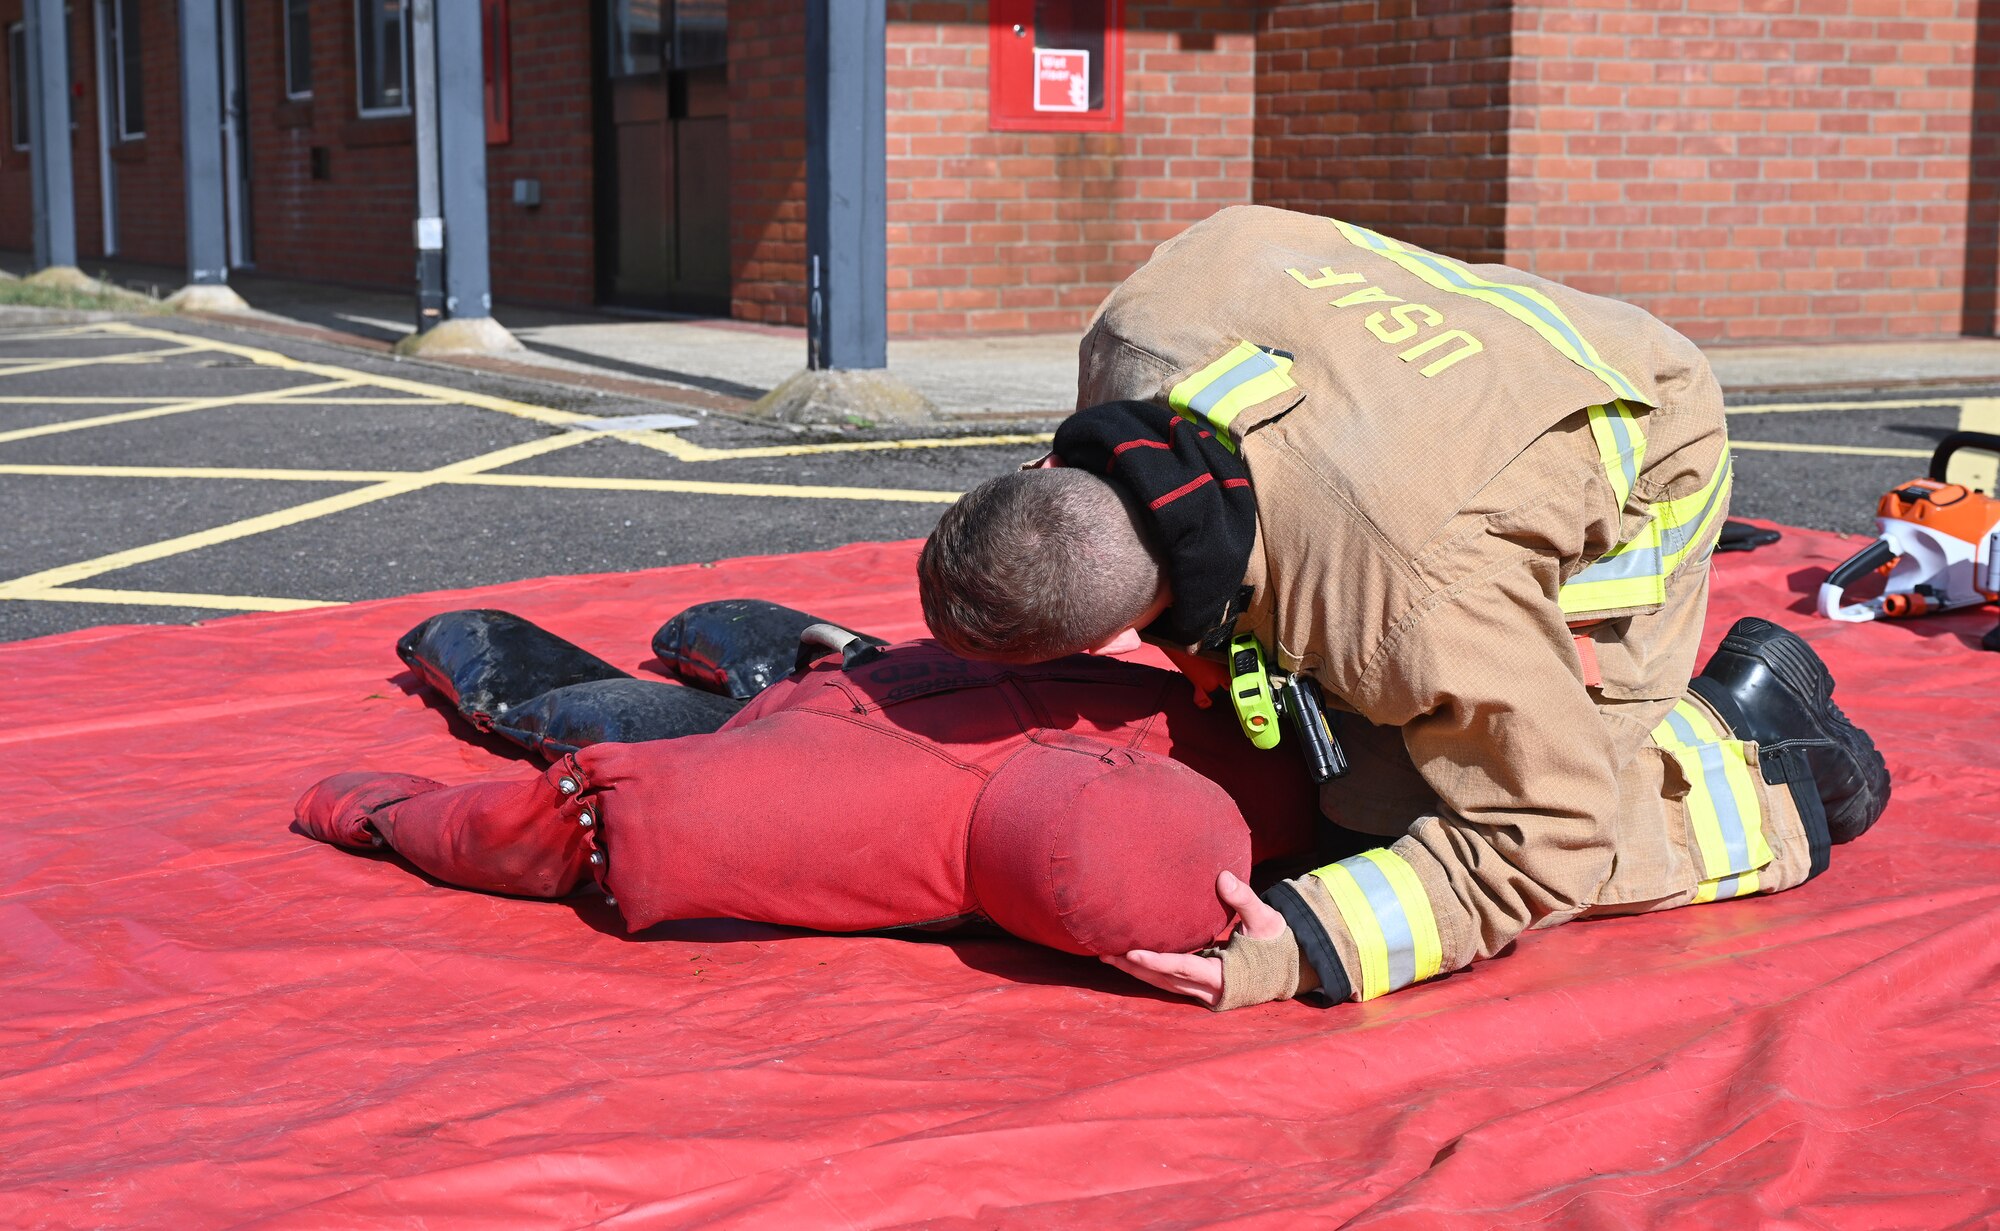 U.S. Air Force Airman 1st Class Jacob Meyer, 100th Civil Engineer Squadron Fire Department firefighter, checks for signs of breathing on a simulated casualty during a natural disaster mass care exercise at Royal Air Force Mildenhall, England, Sept. 21, 2023. The exercise allowed firefighters and 100th Security Forces Squadron defenders to practice performing essential operations during a simulated natural disaster incident. (U.S. Air Force photo by Karen Abeyasekere)